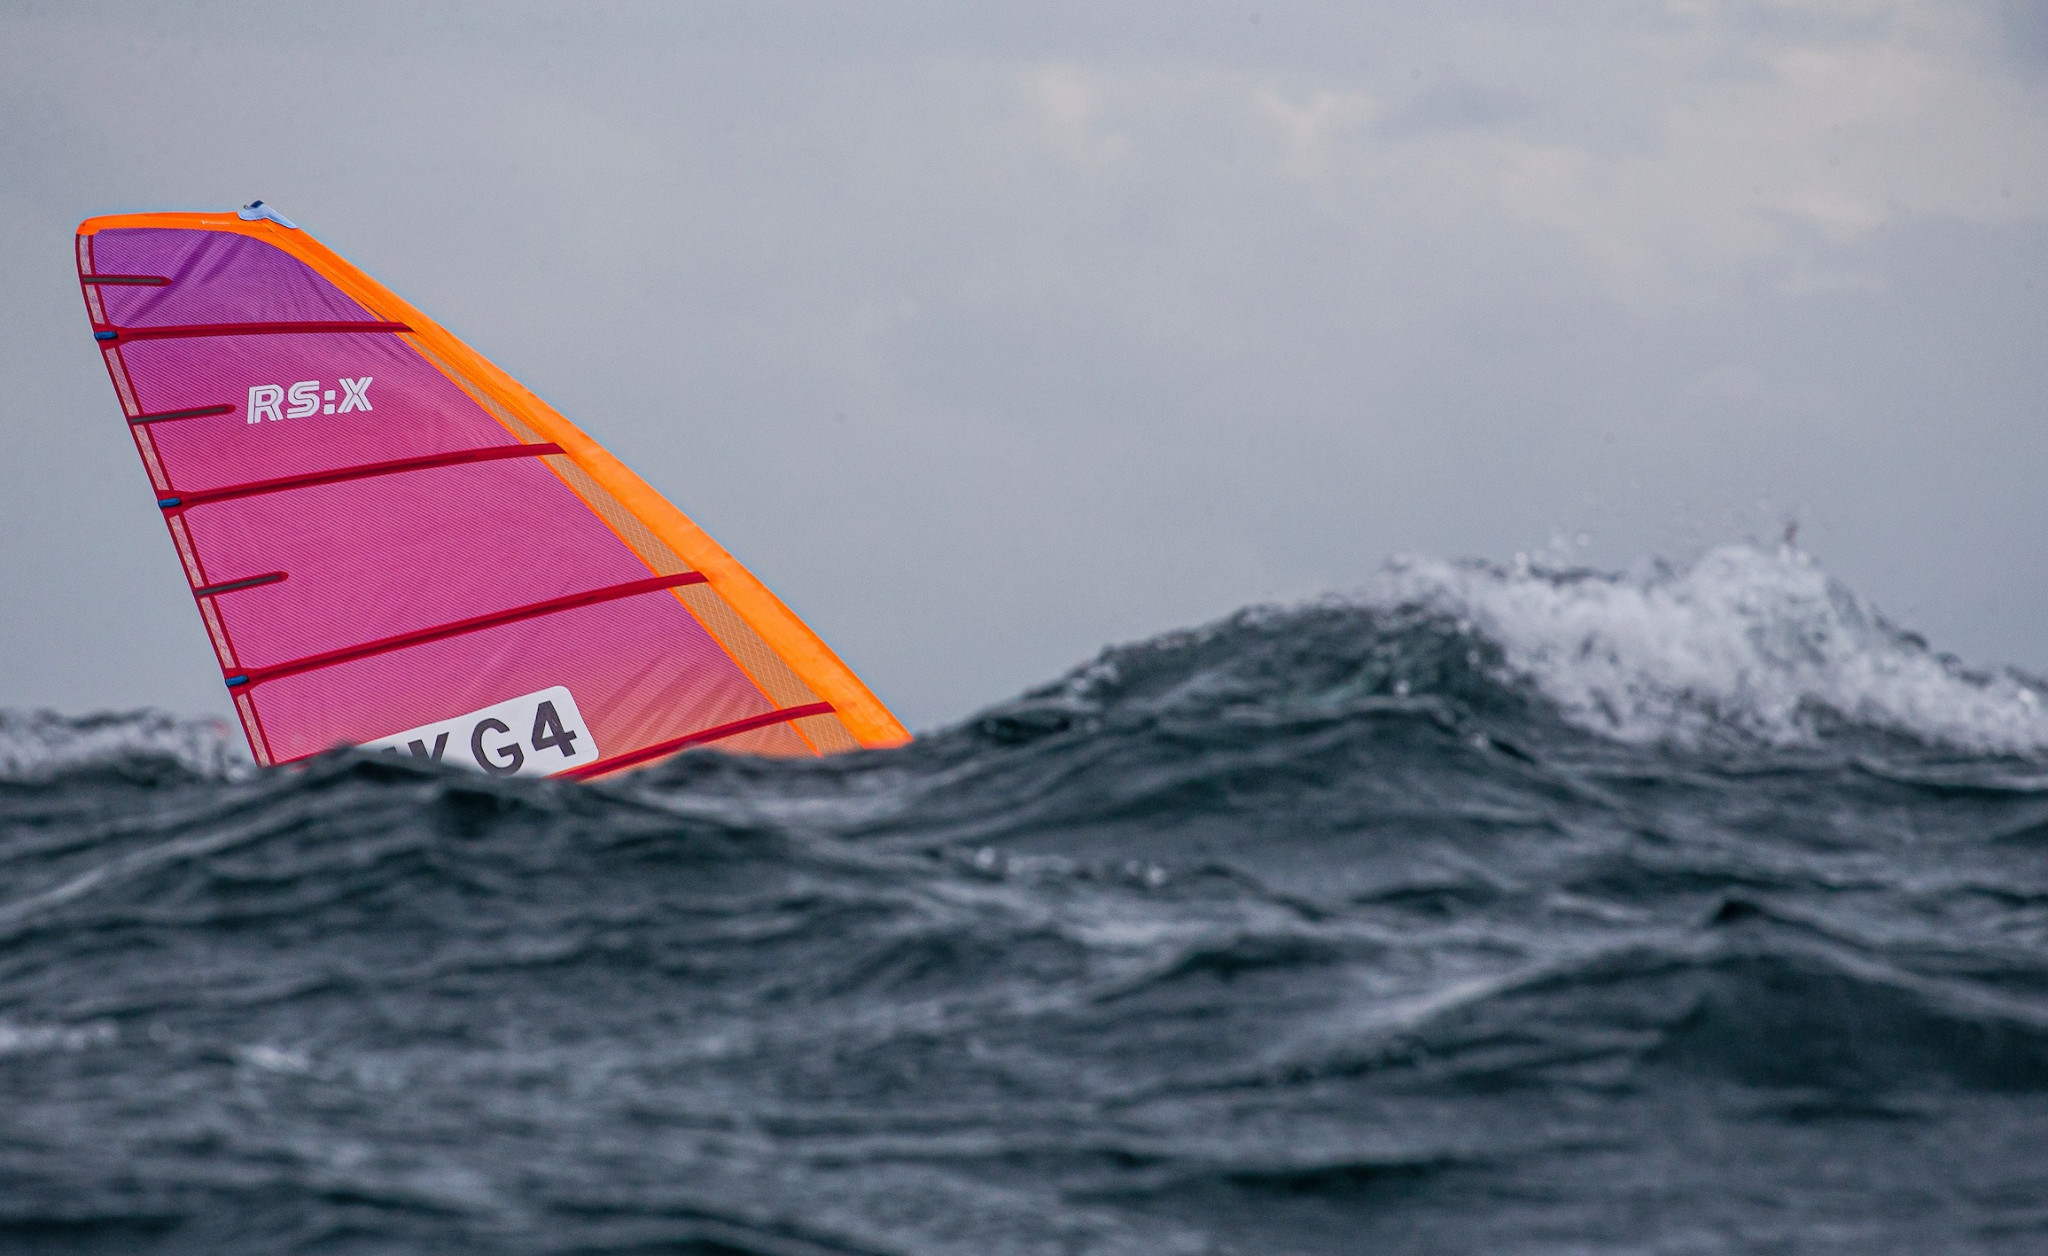 RS:X windsurfing action was possible in the challenging environment ©World Sailing